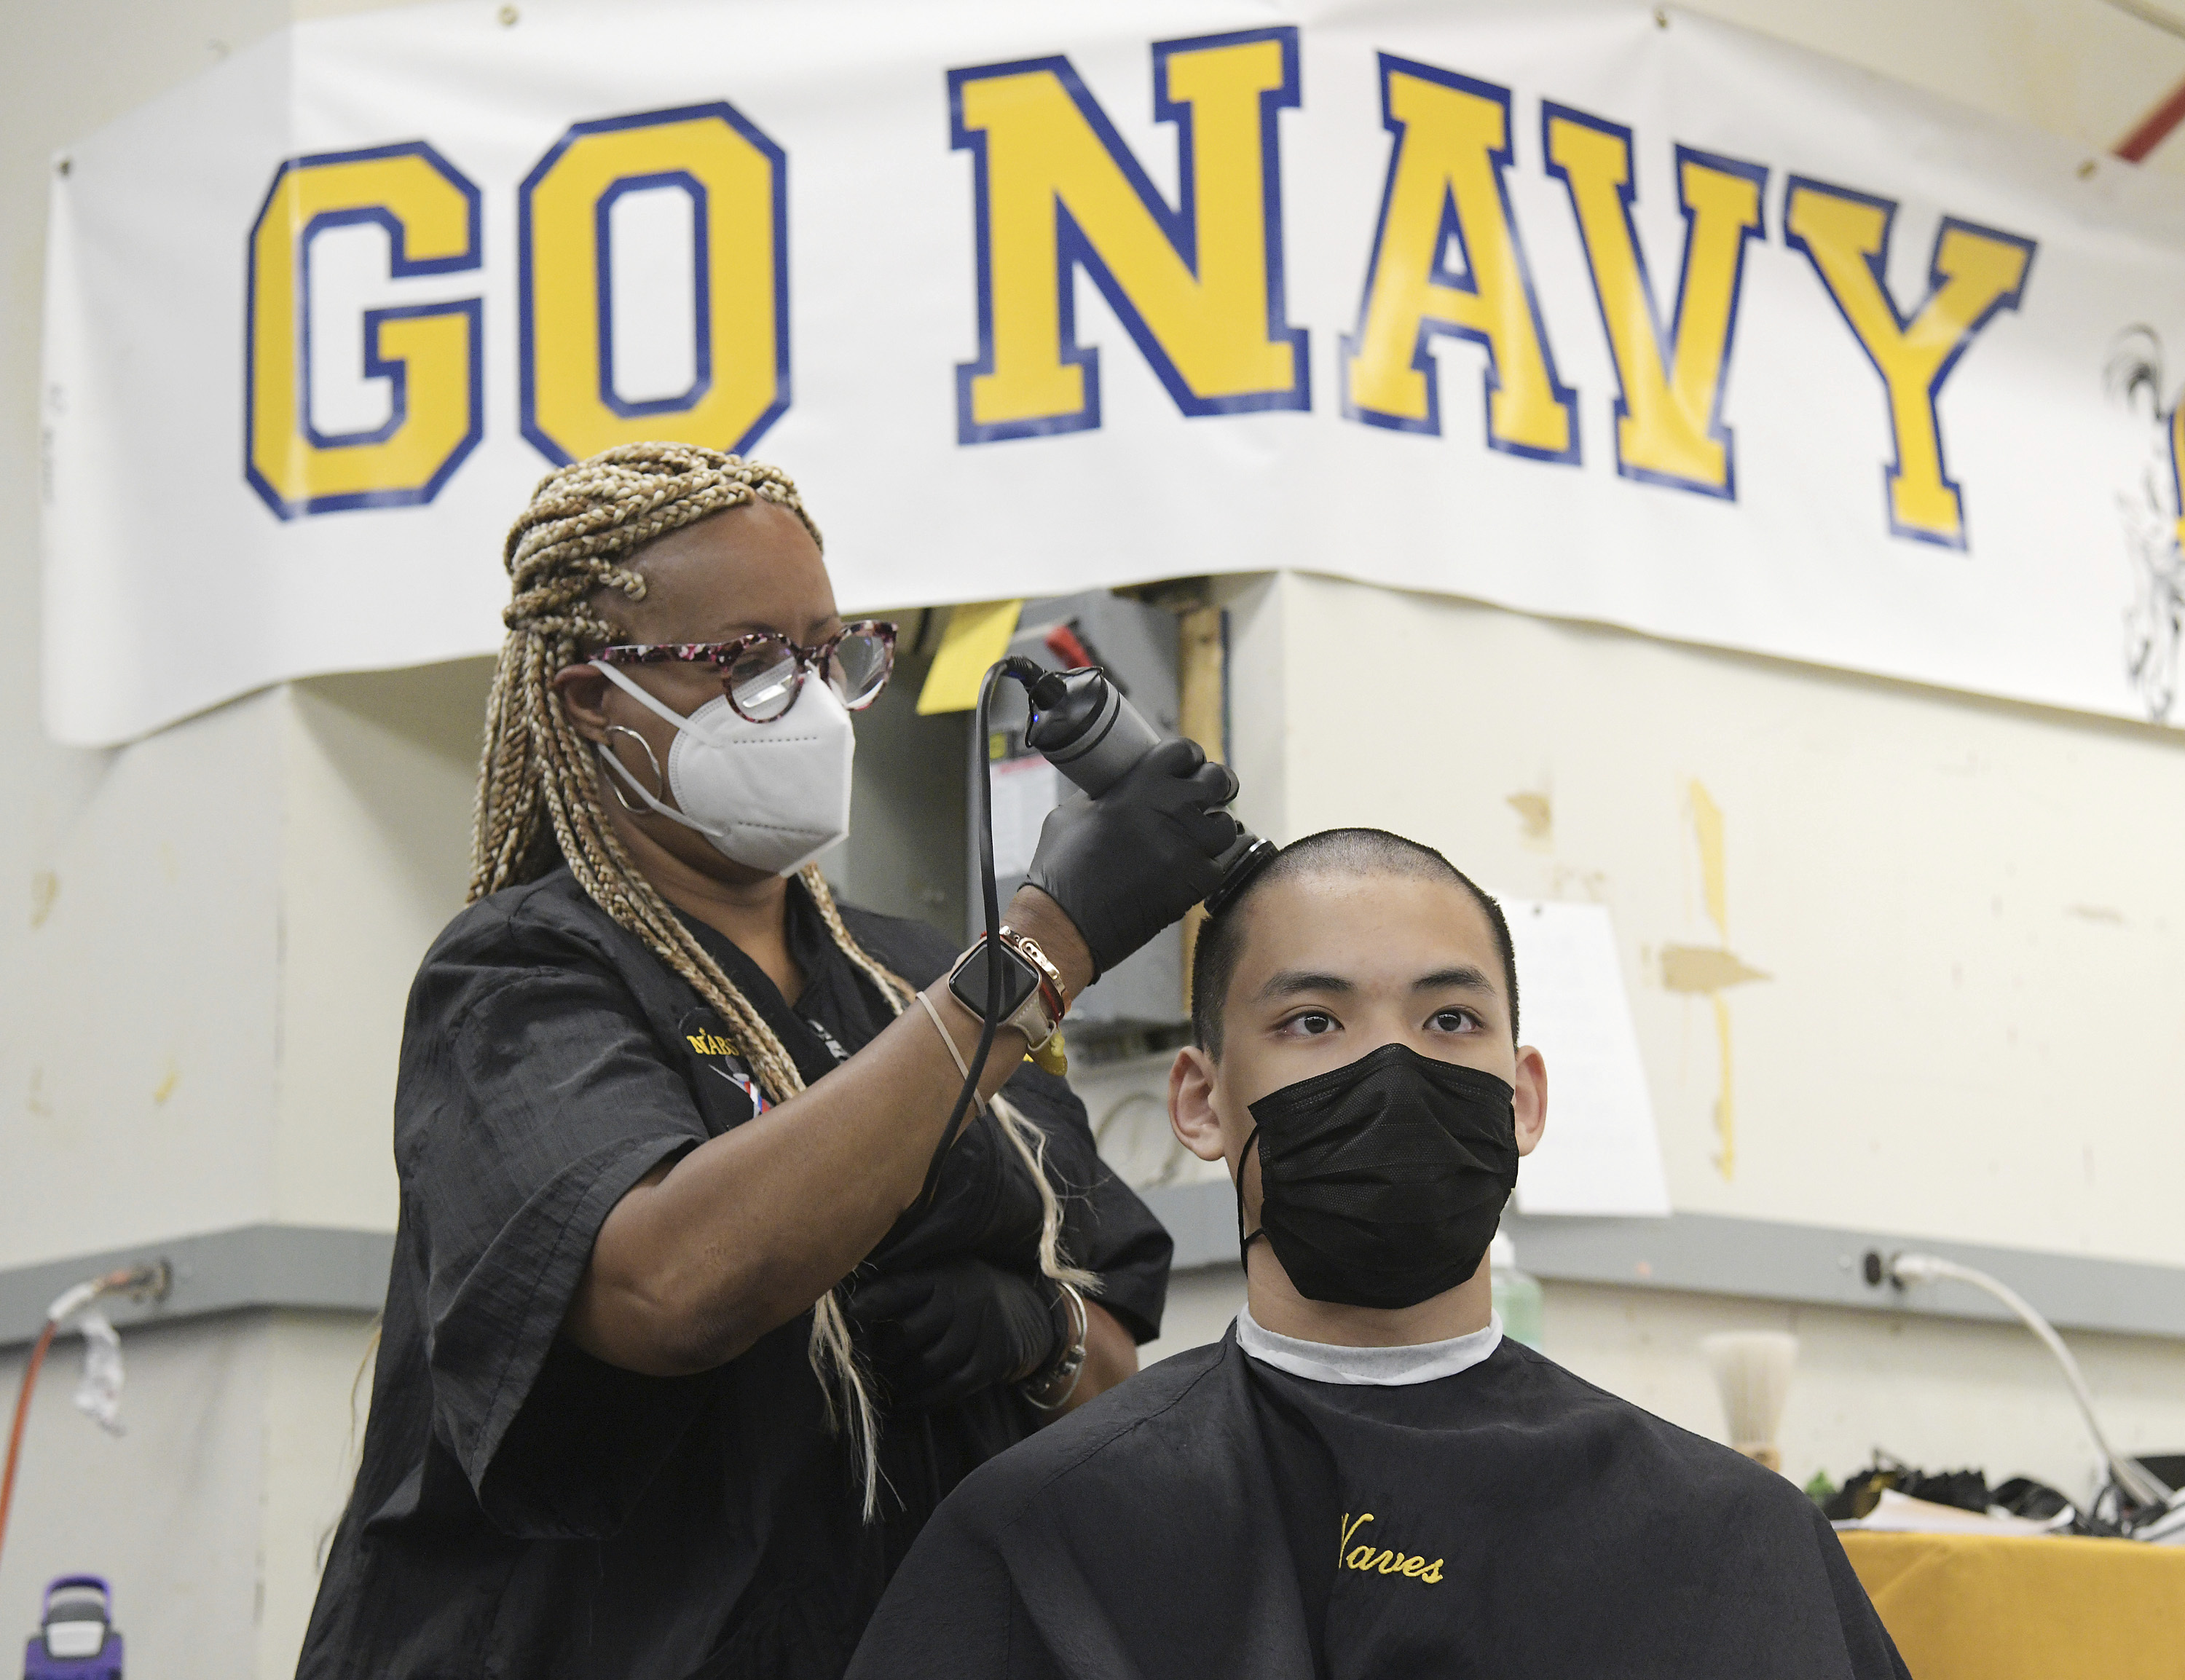 Navy expands female hair regs, includes two-strand braids